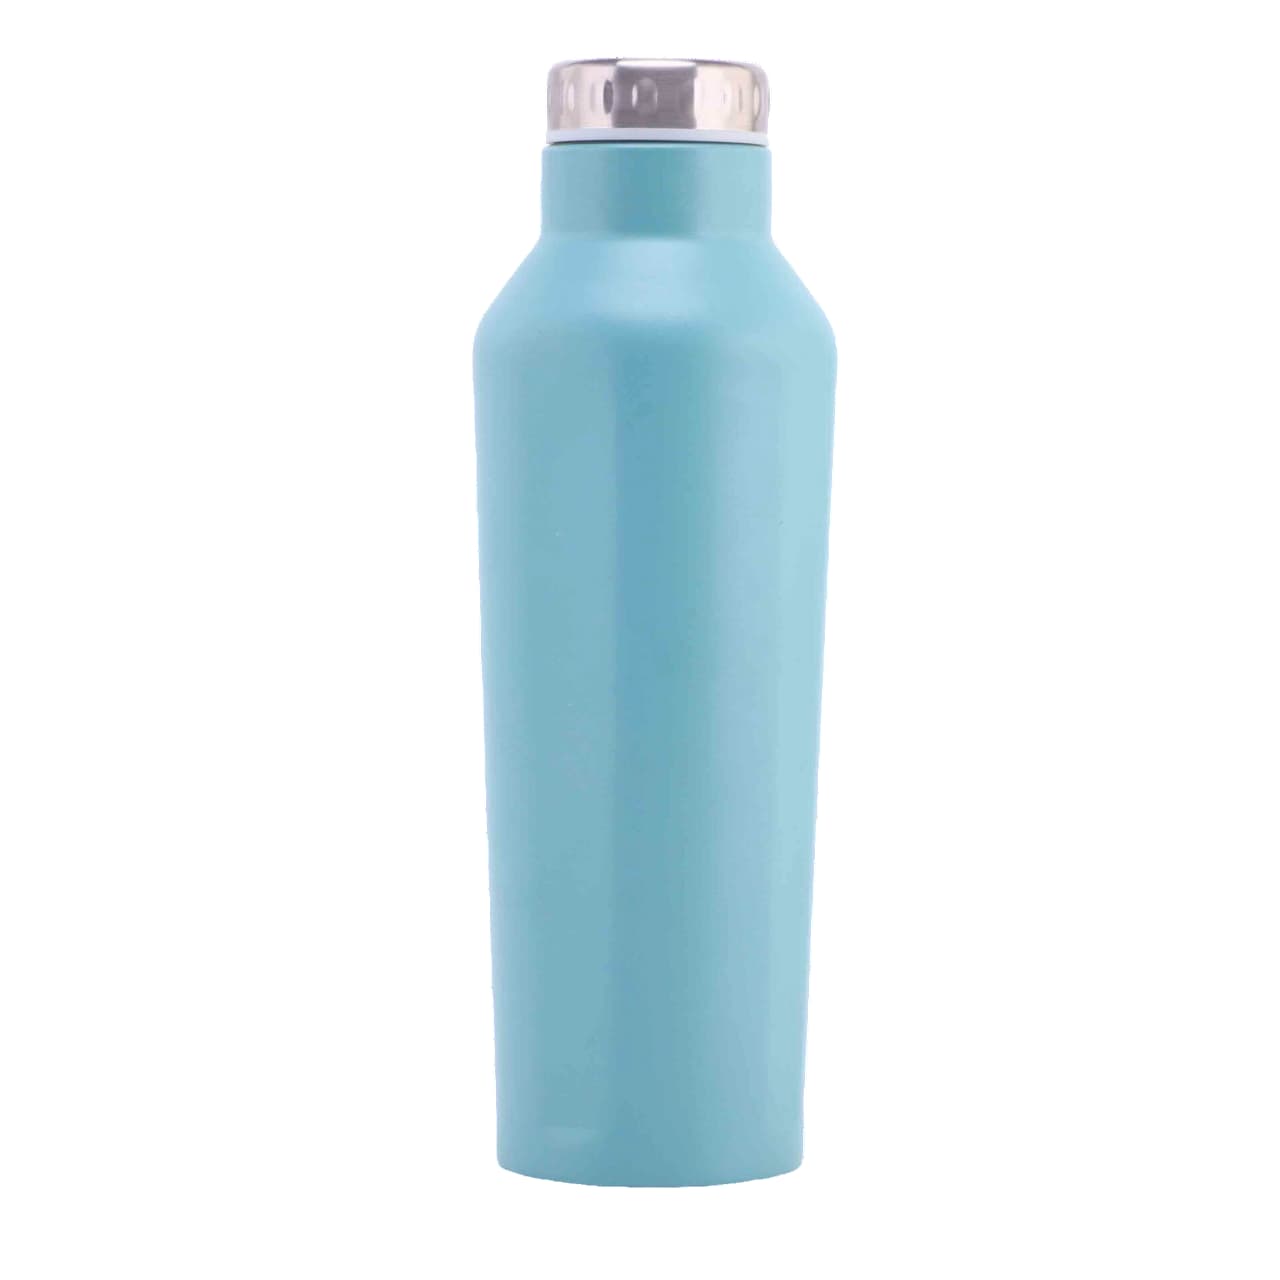 304 stainless steel hexagonal rhombus stainless steel thermos cup-light blue